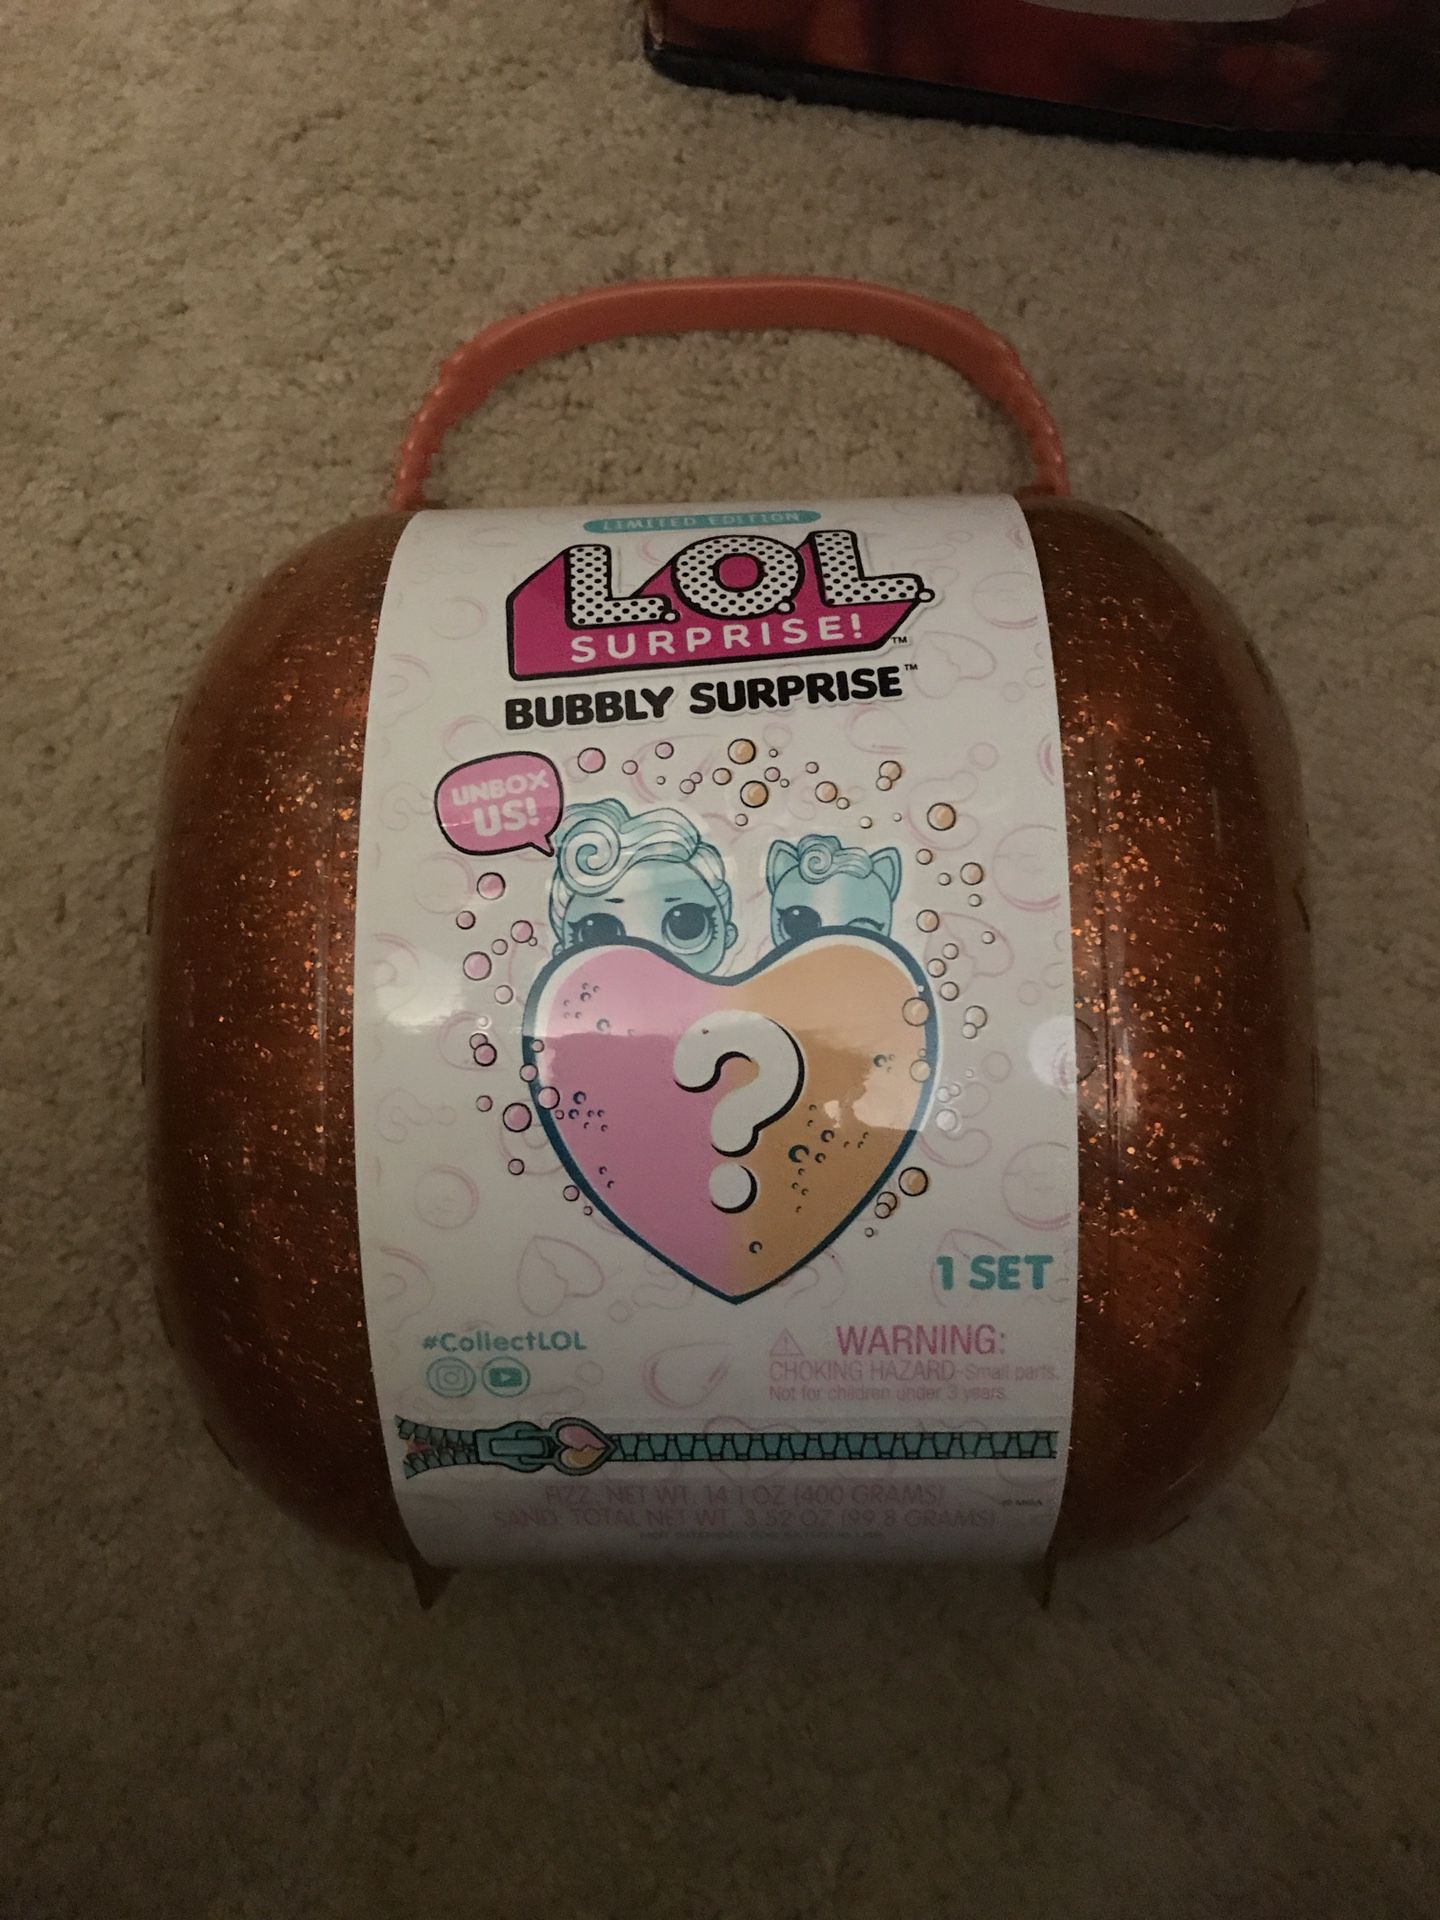 Lol mystery surprise dolls bubbly suitcase orange or pink